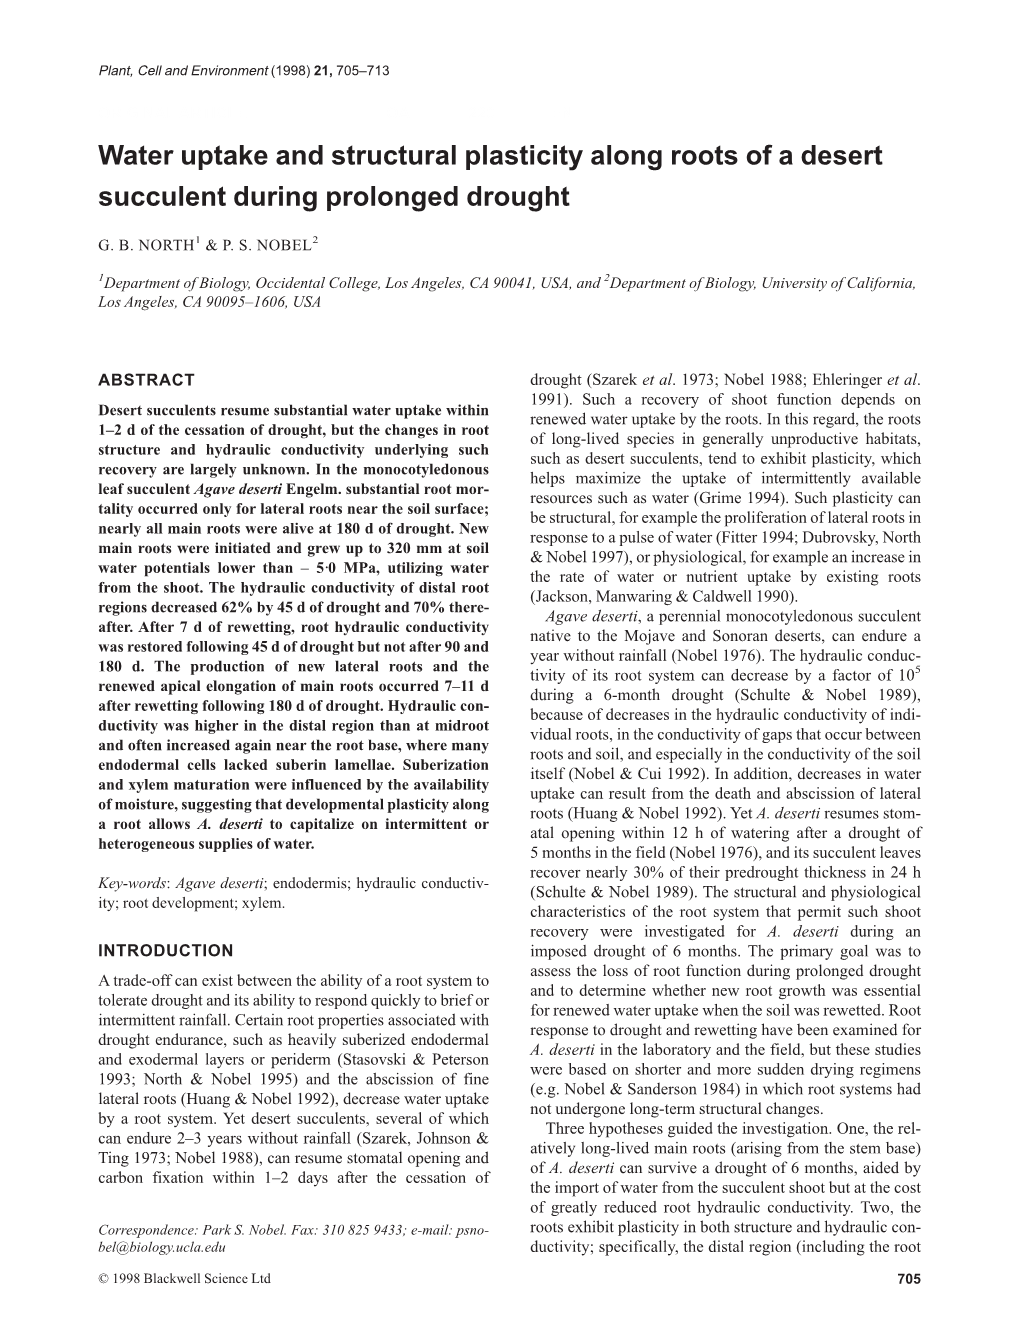 Water Uptake and Structural Plasticity Along Roots of a Desert Succulent During Prolonged Drought